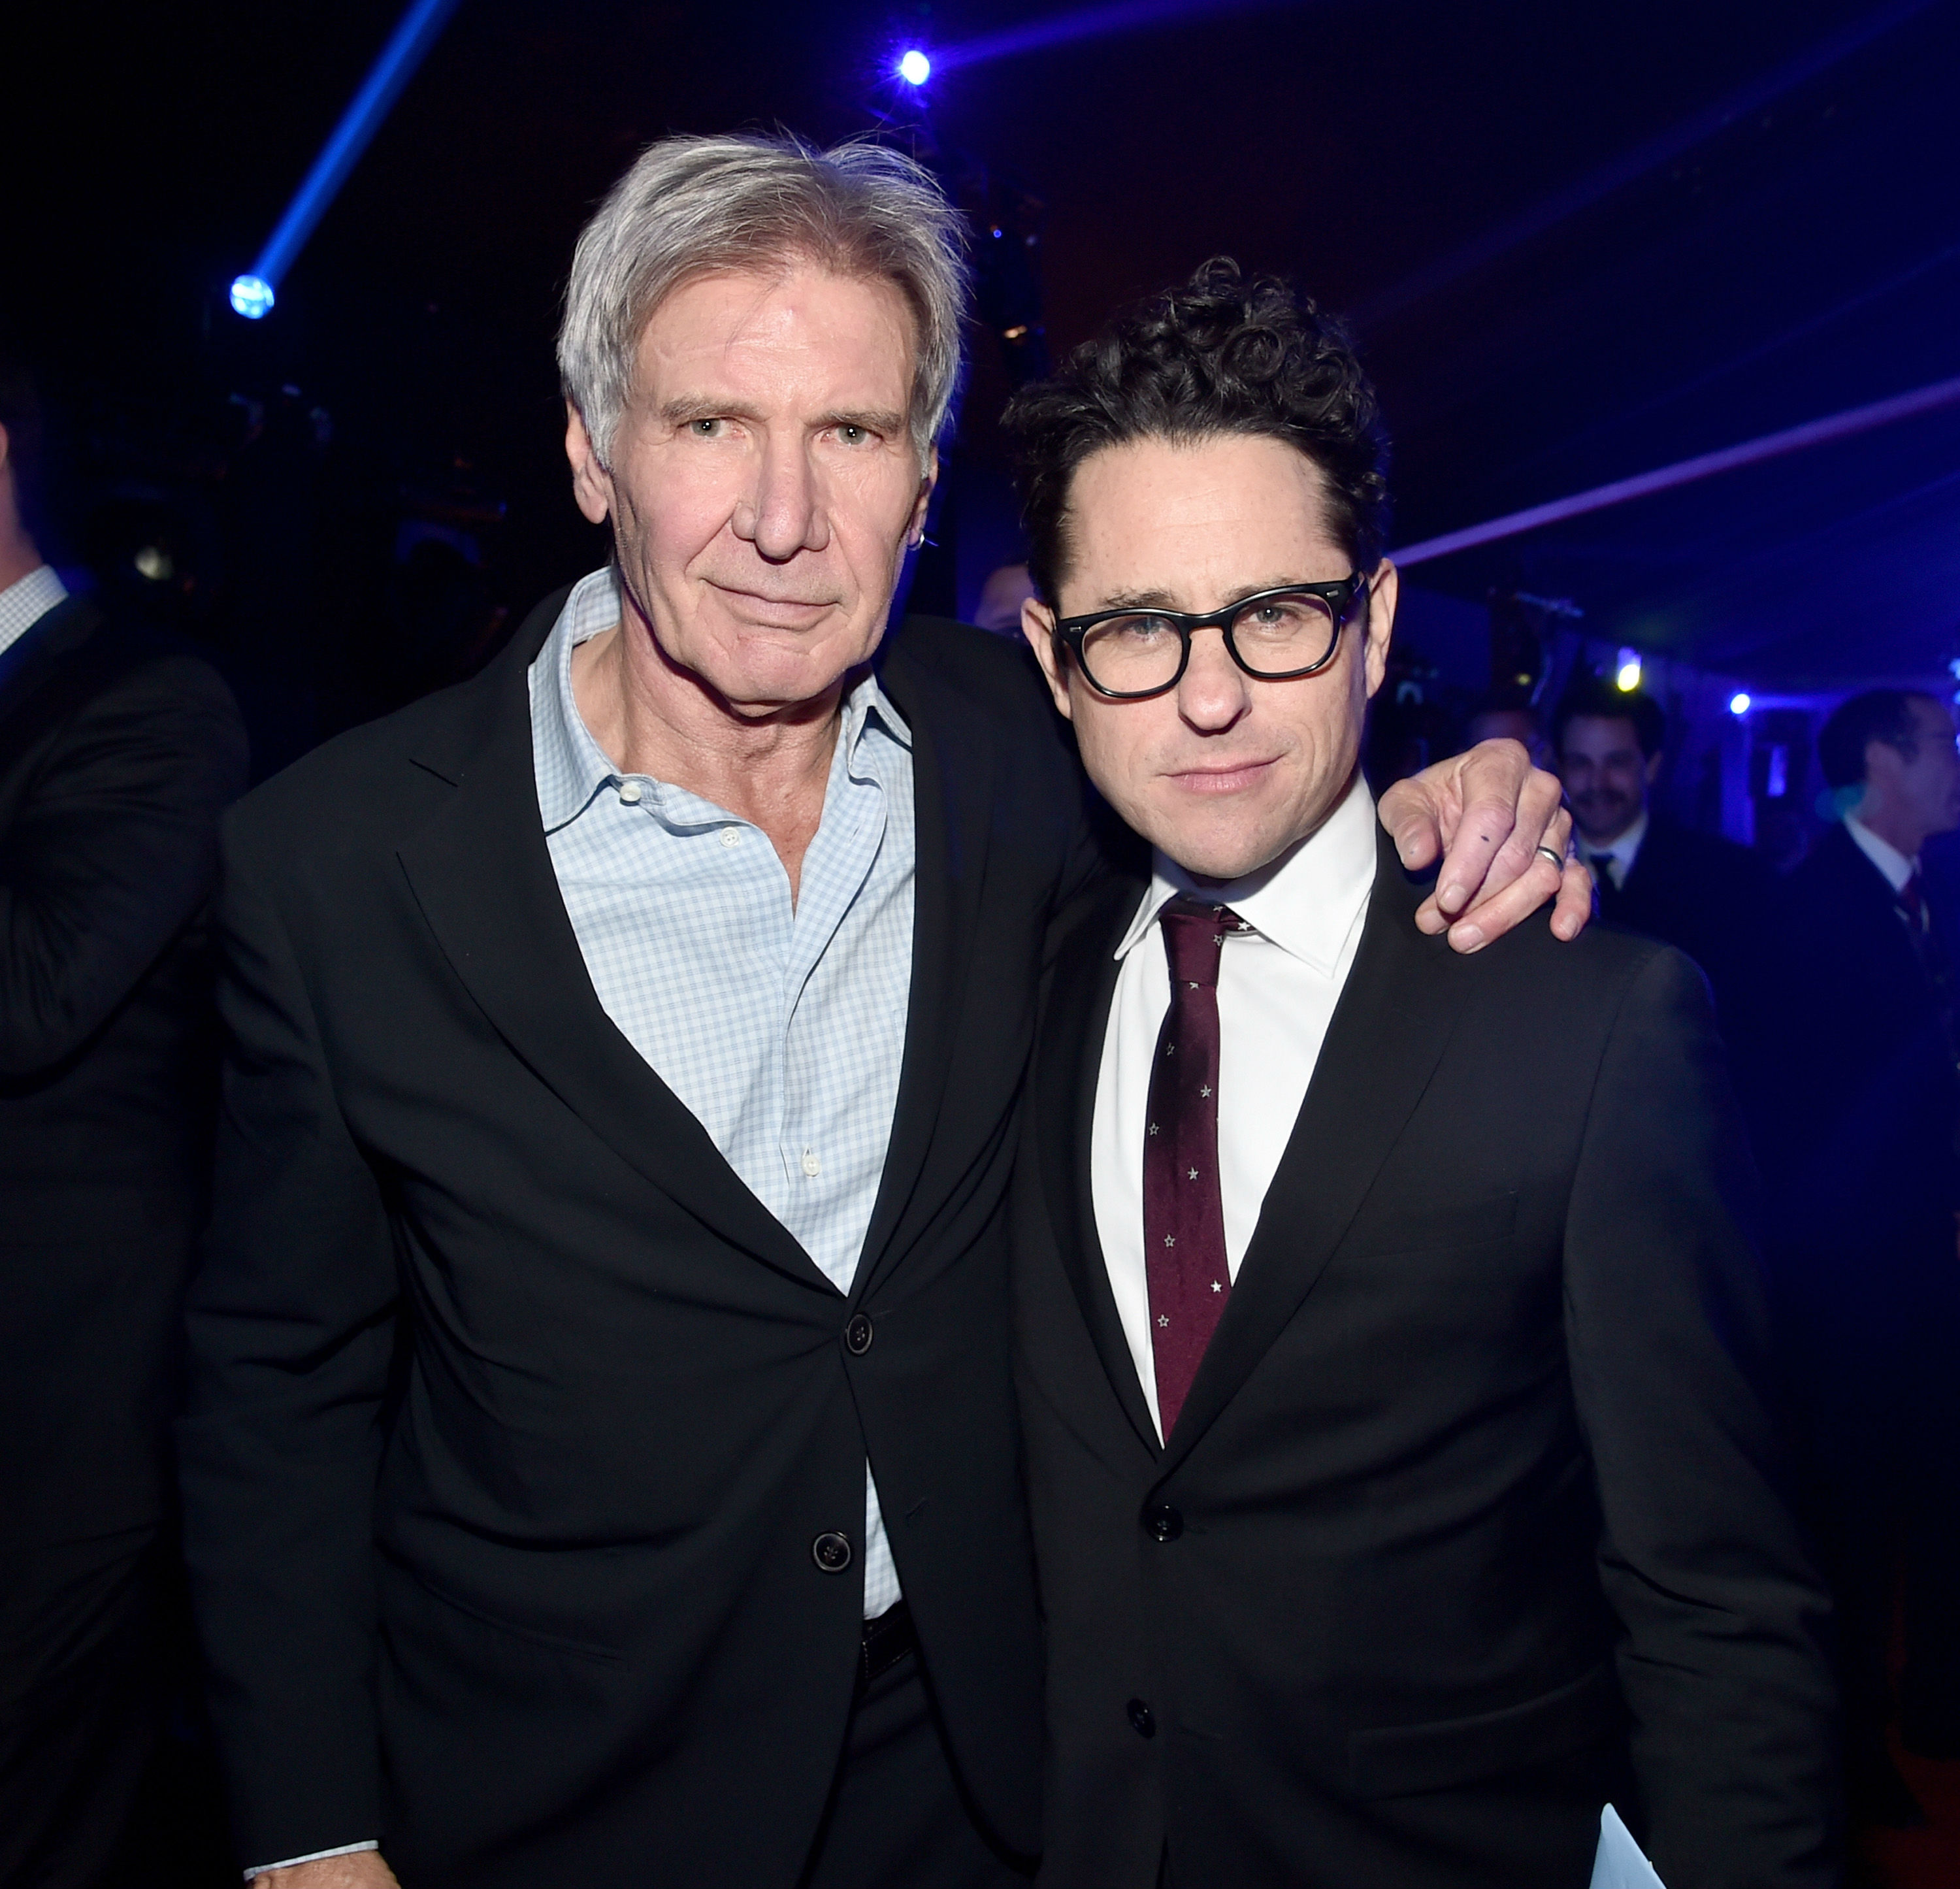 Star-Wars-The-Force-Awakens-afterparty-Harrison-Ford-and-J.J.-Abrams